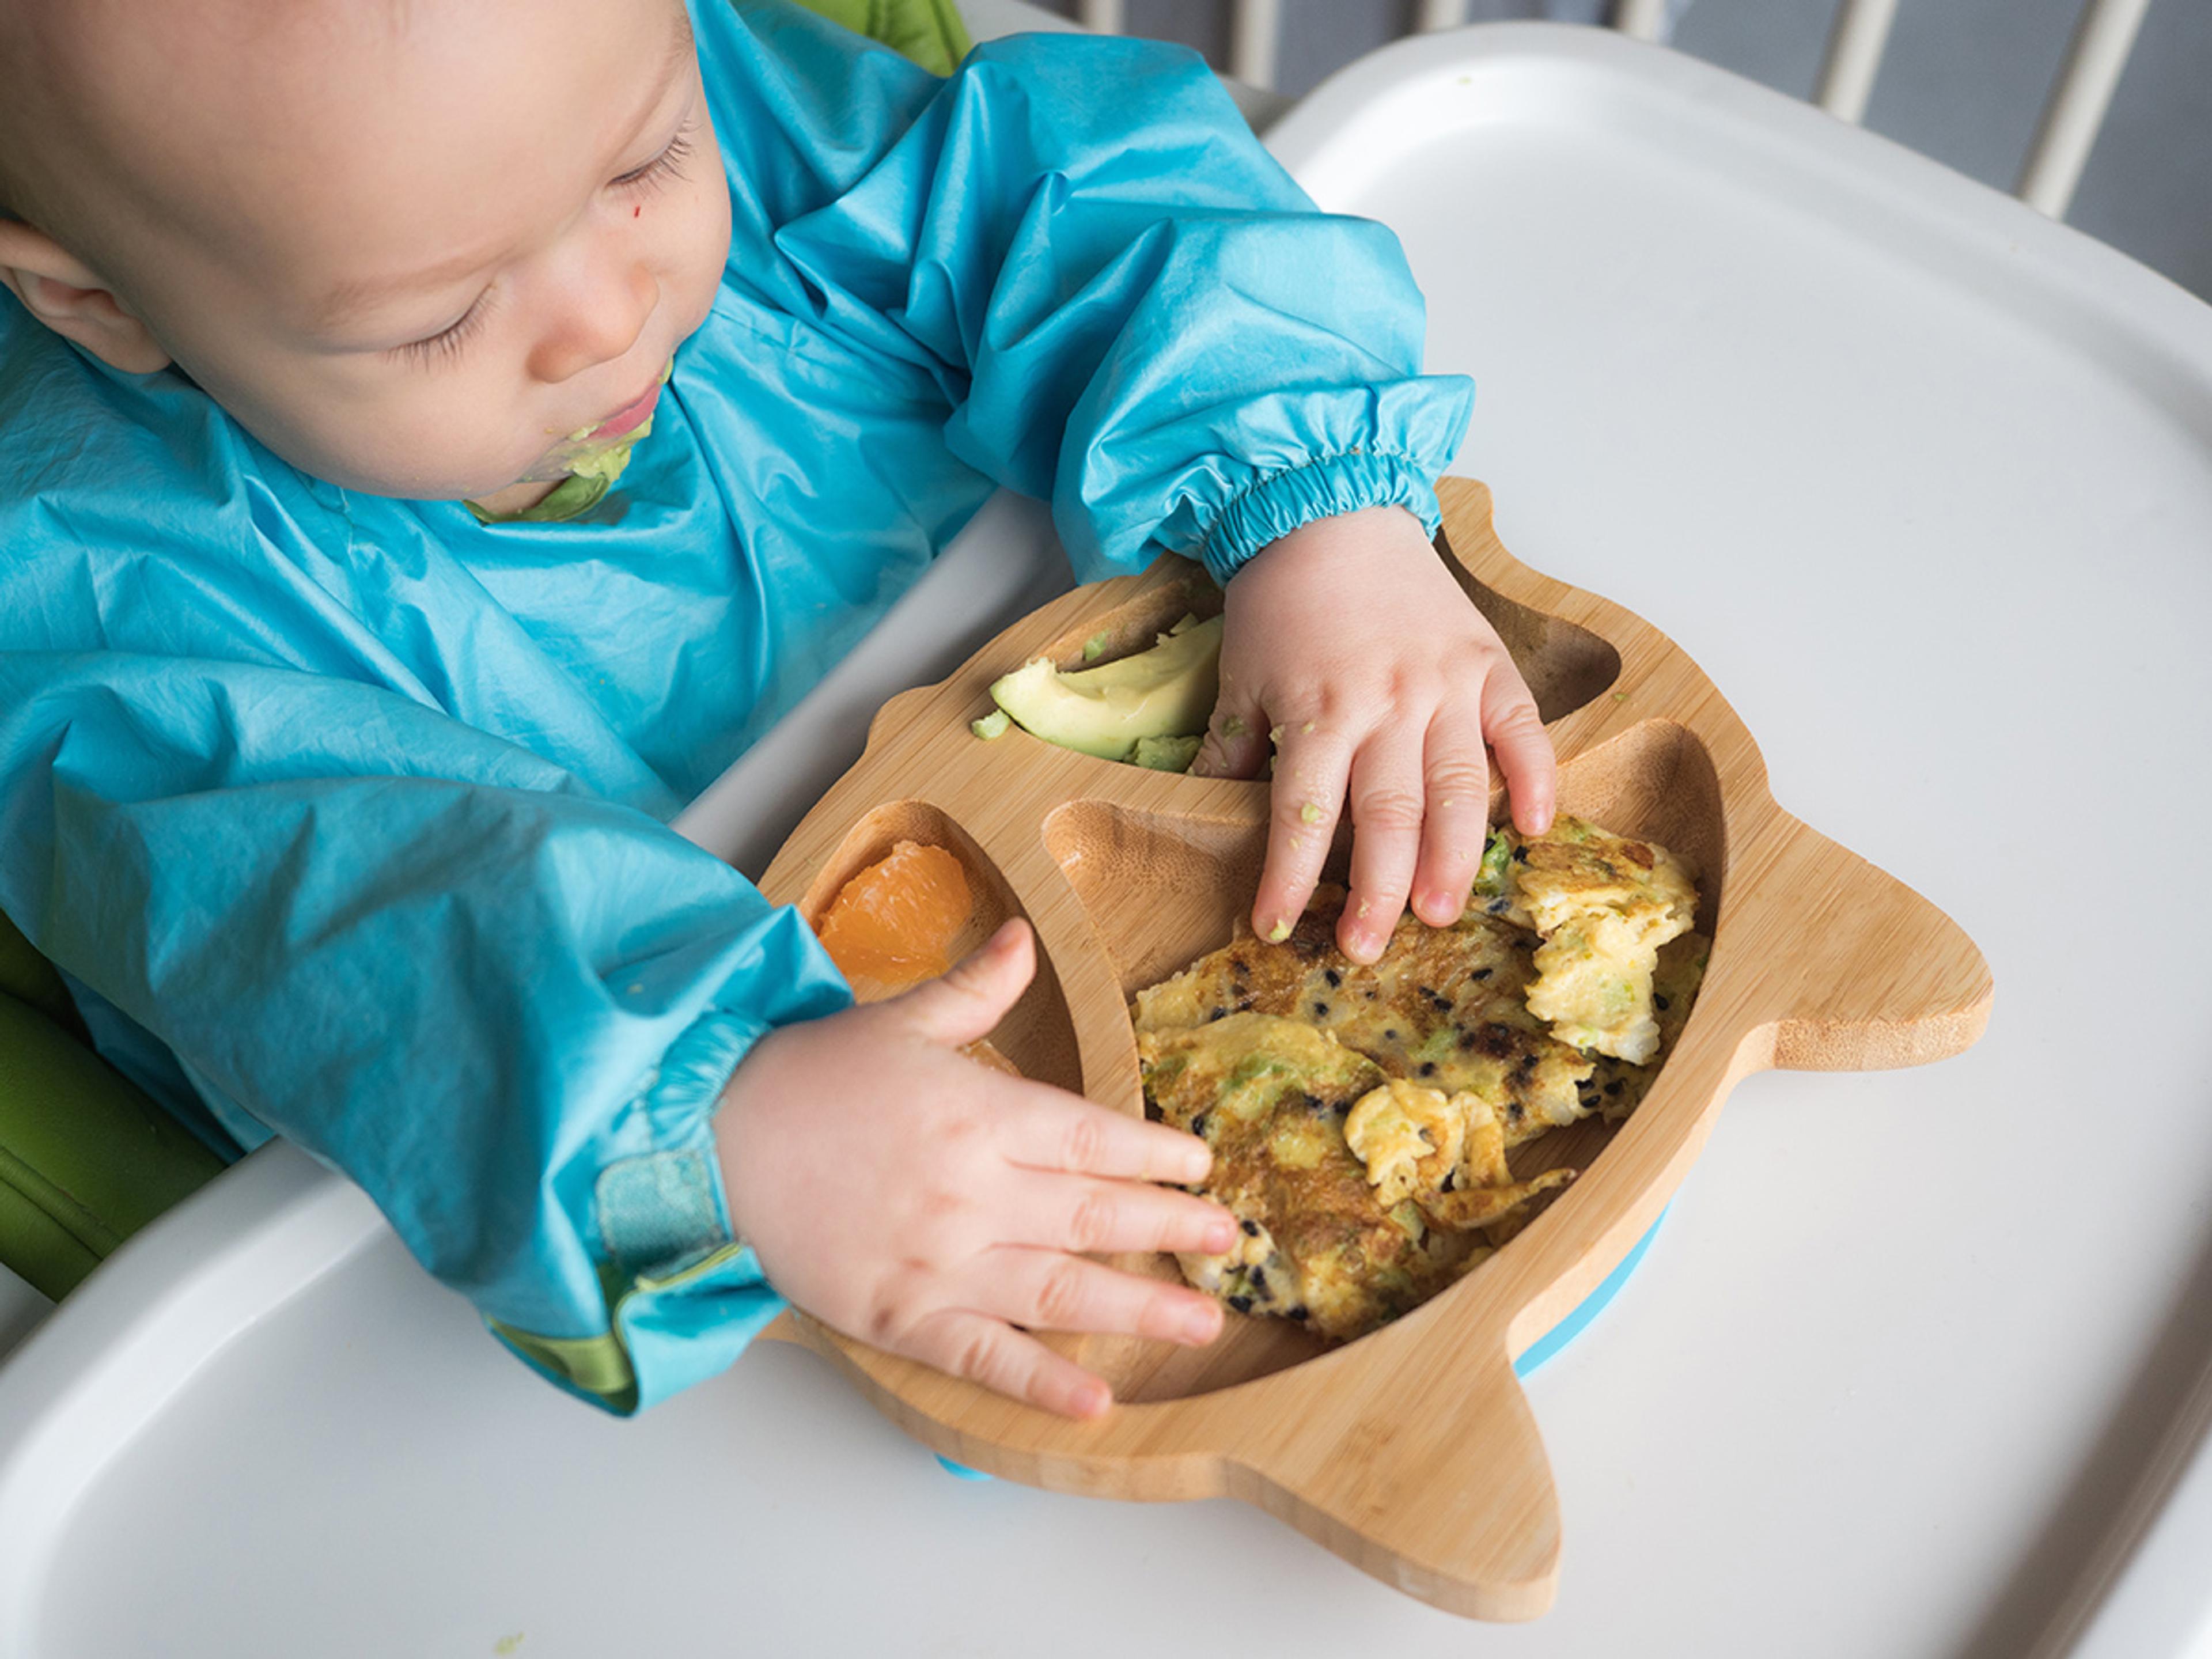 Asian baby eats a plate of food, including avocados and scrambled eggs.